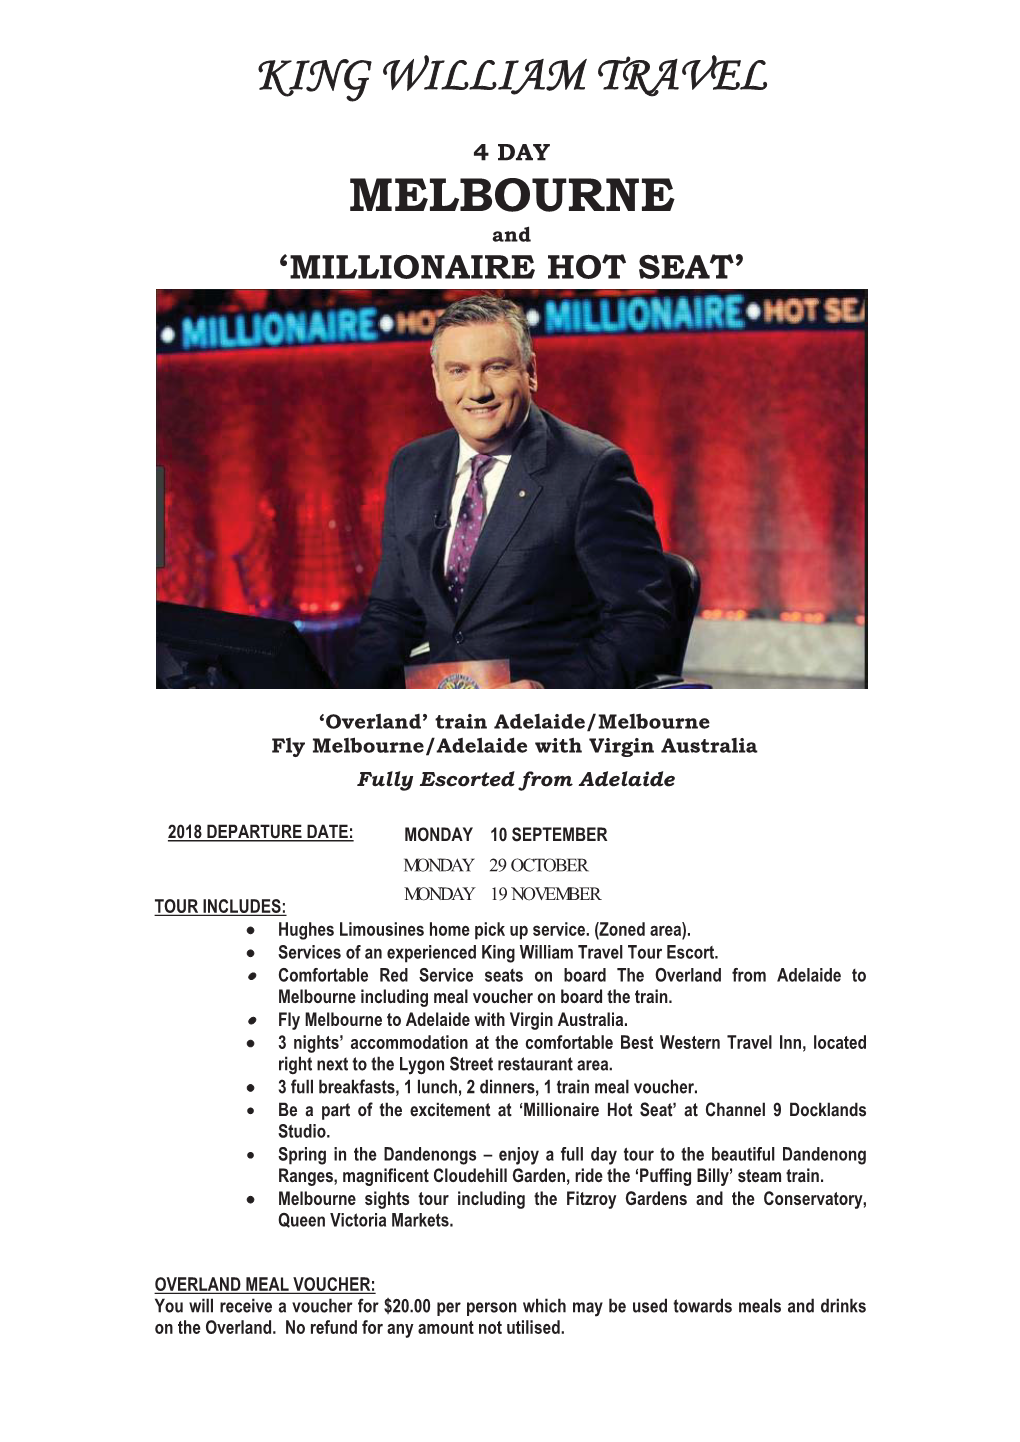 MELBOURNE and ‘MILLIONAIRE HOT SEAT’